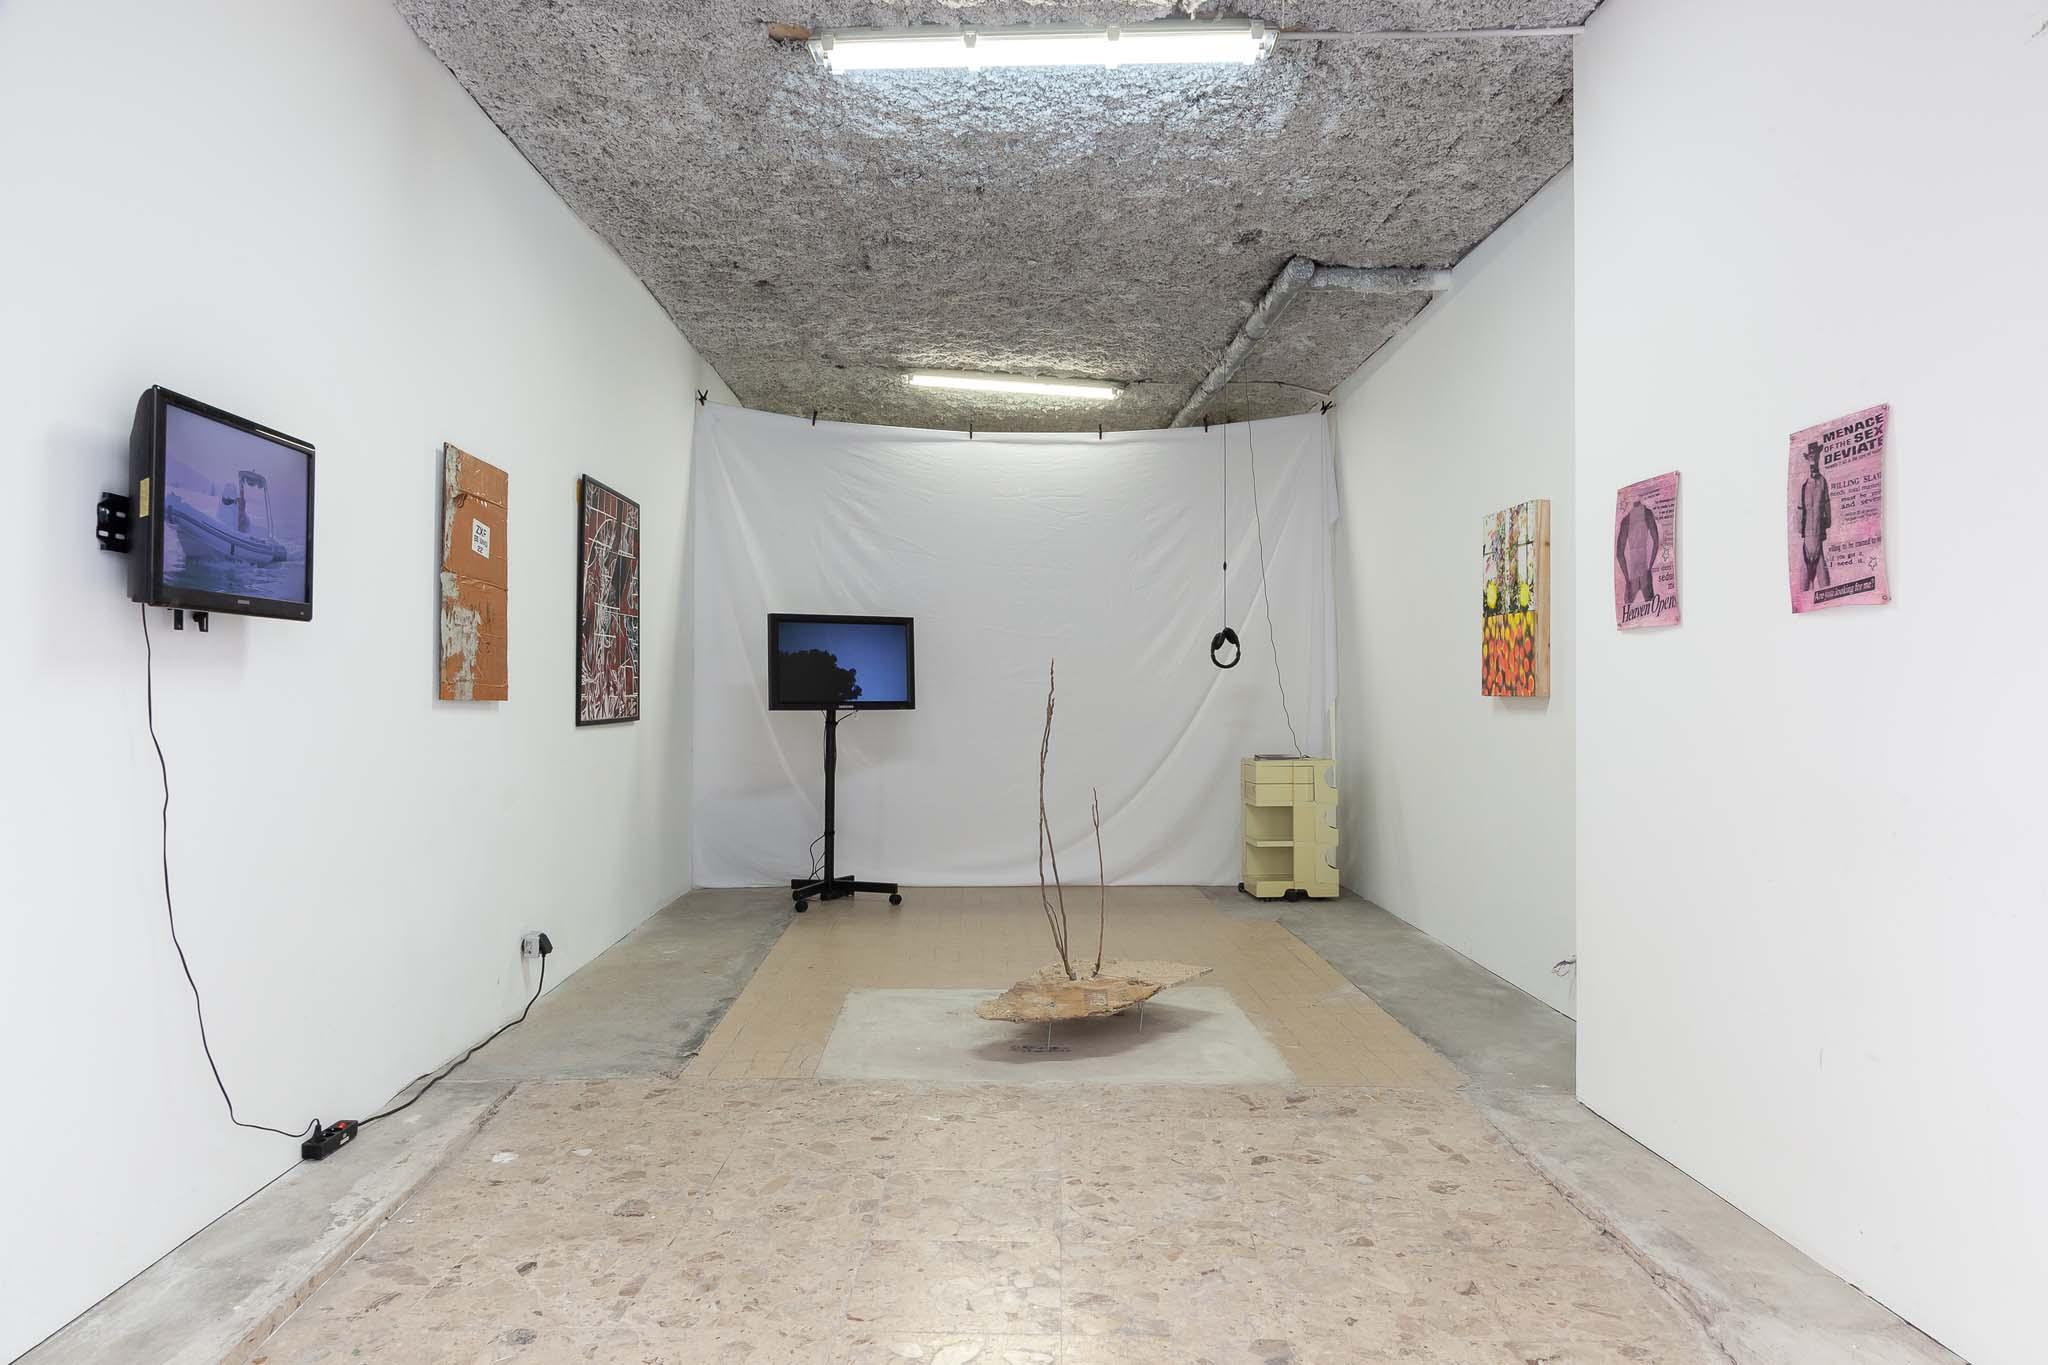 Installation view, 'Porous Cities', South Parade at Feria (Organised by Sofia HallstrÃ¶m)